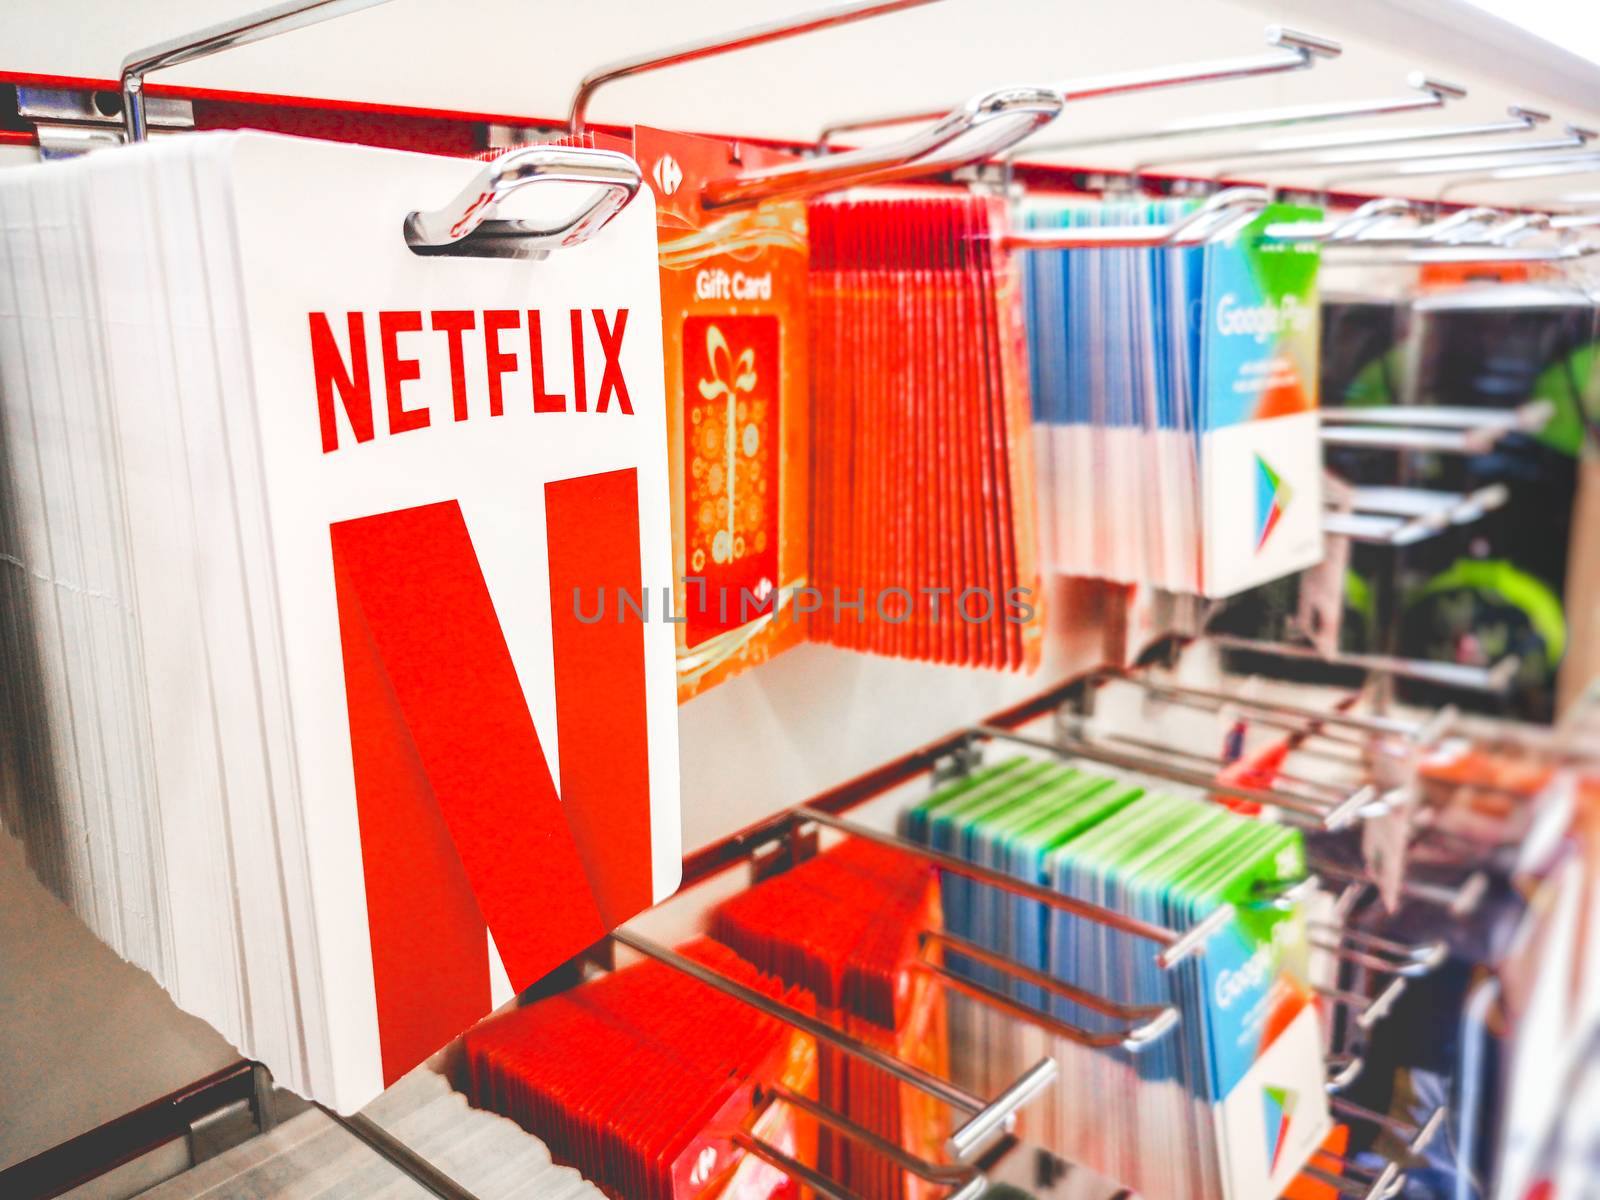 Netflix Gift cards for the streaming subscription service in a shelf of a super store shop in Bologna, Italy, 9 Nov 2019